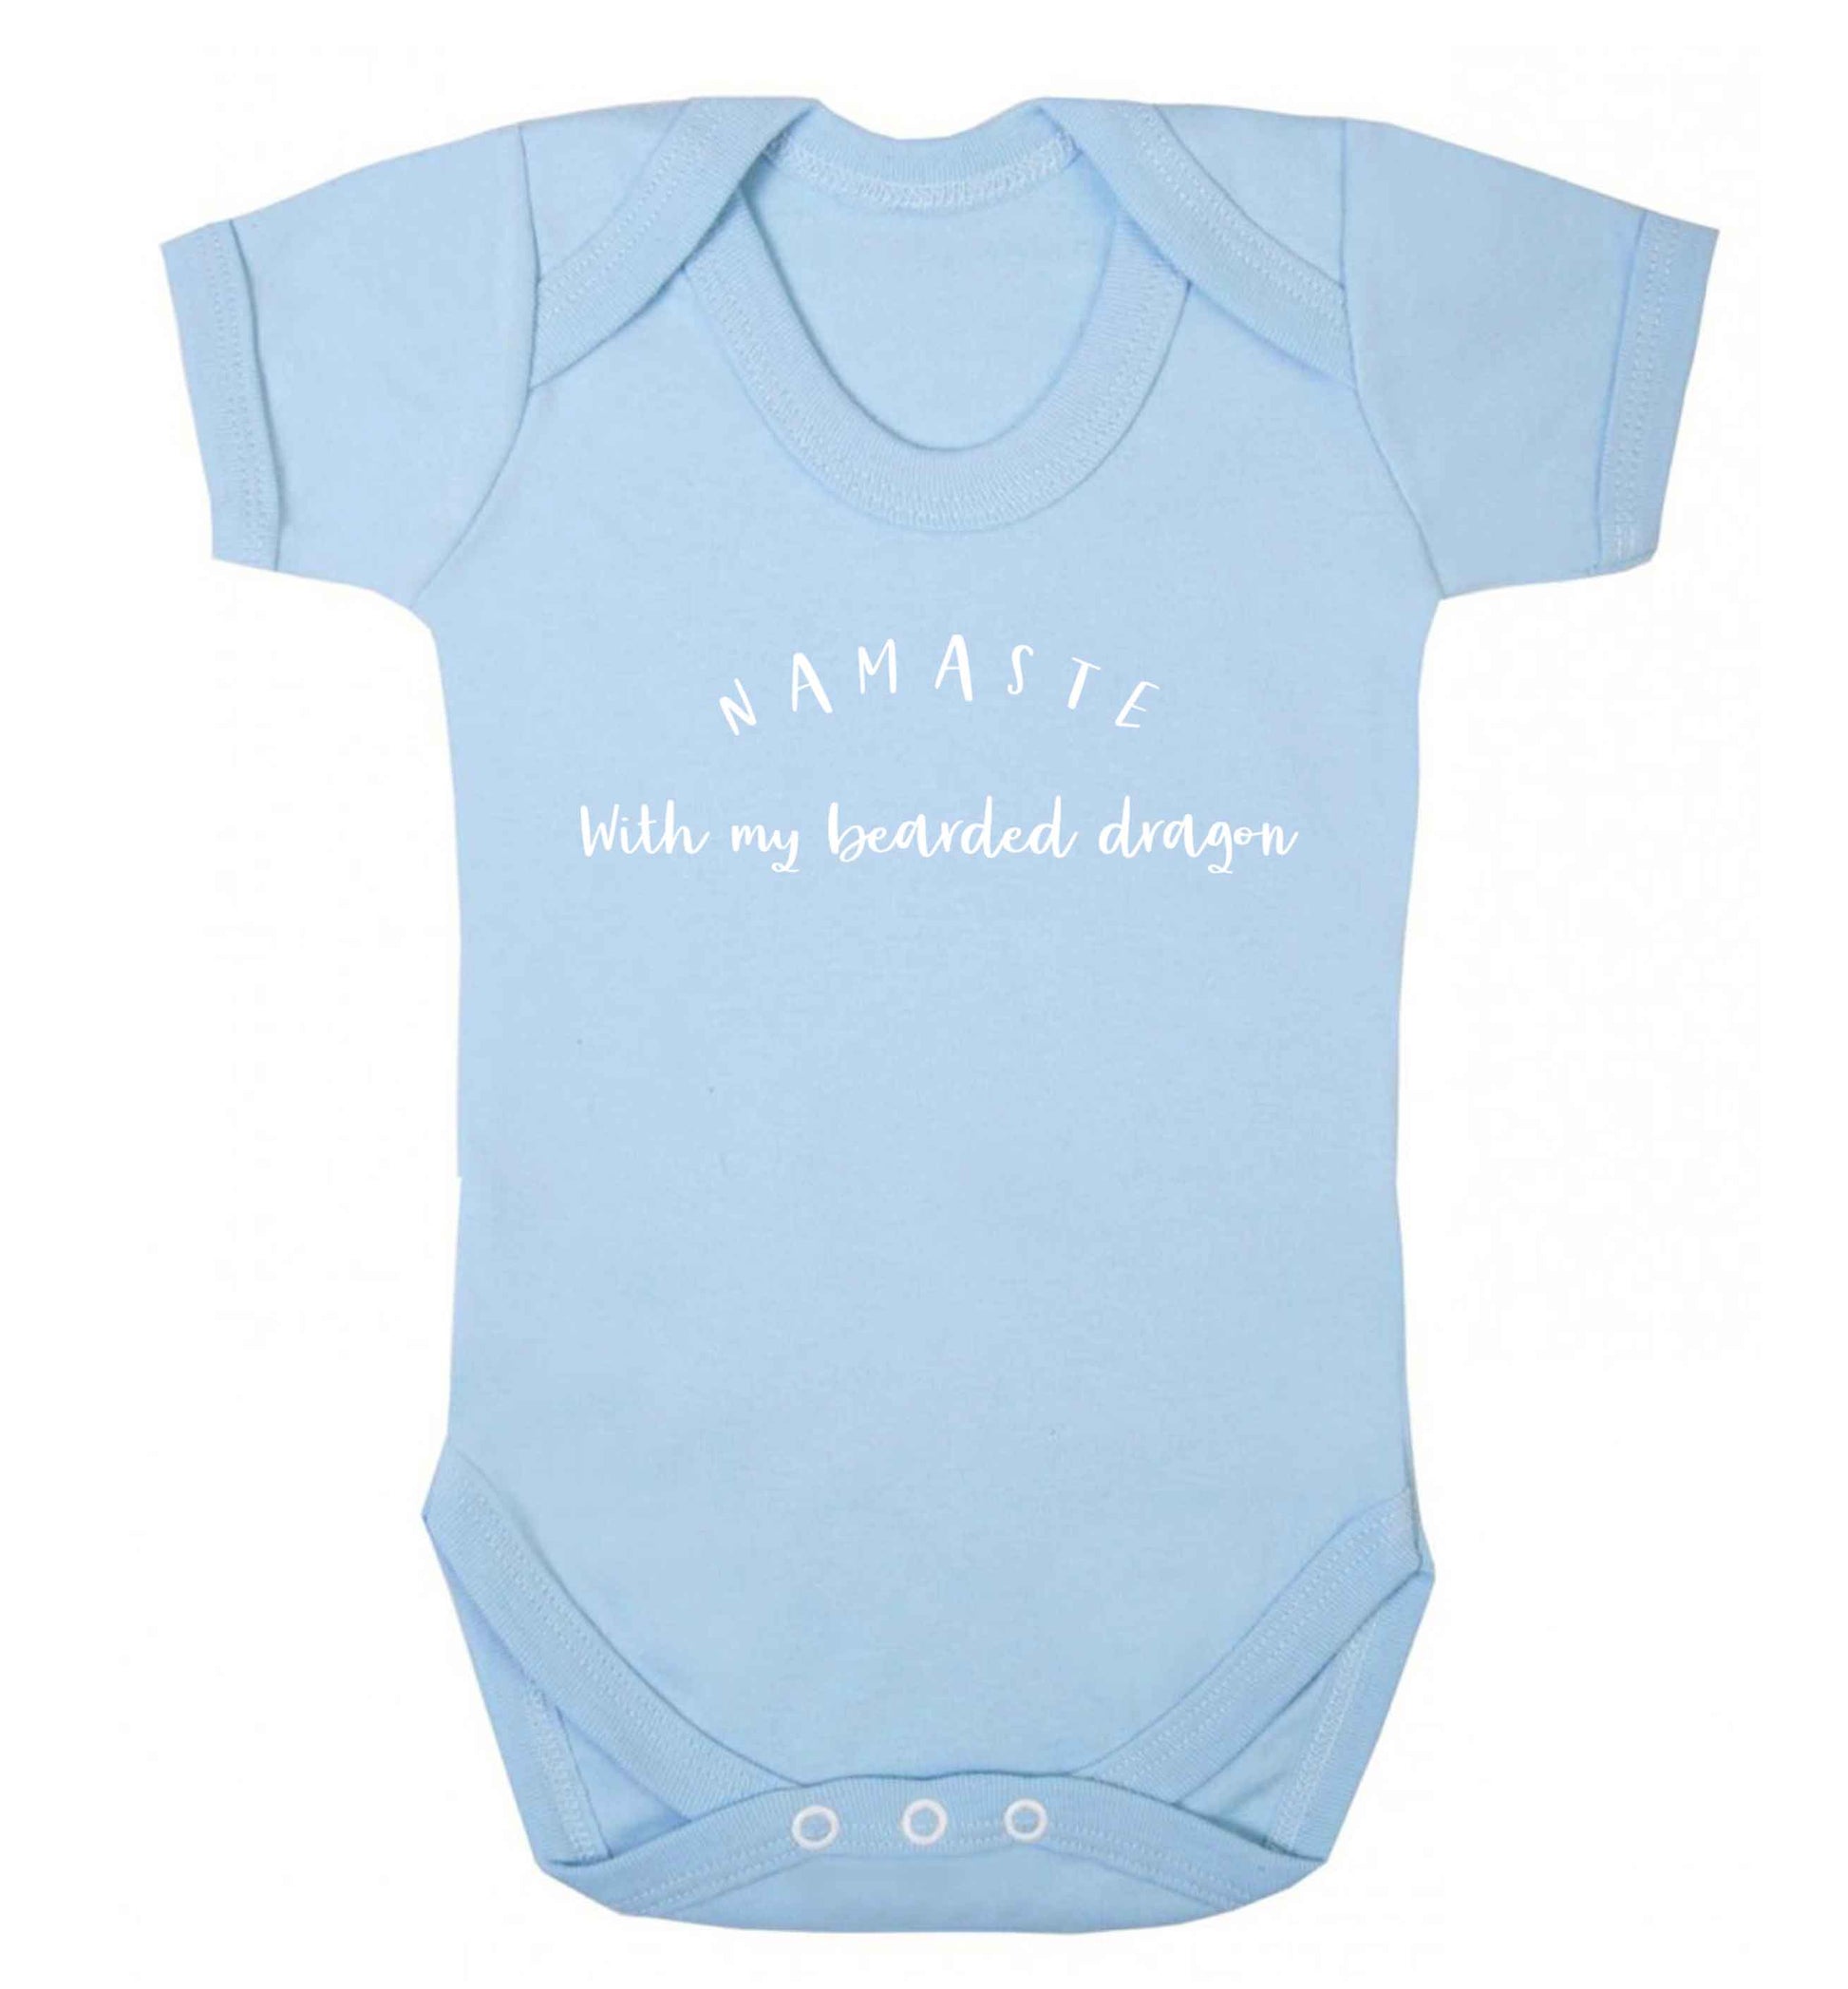 Namaste with my bearded dragon Baby Vest pale blue 18-24 months